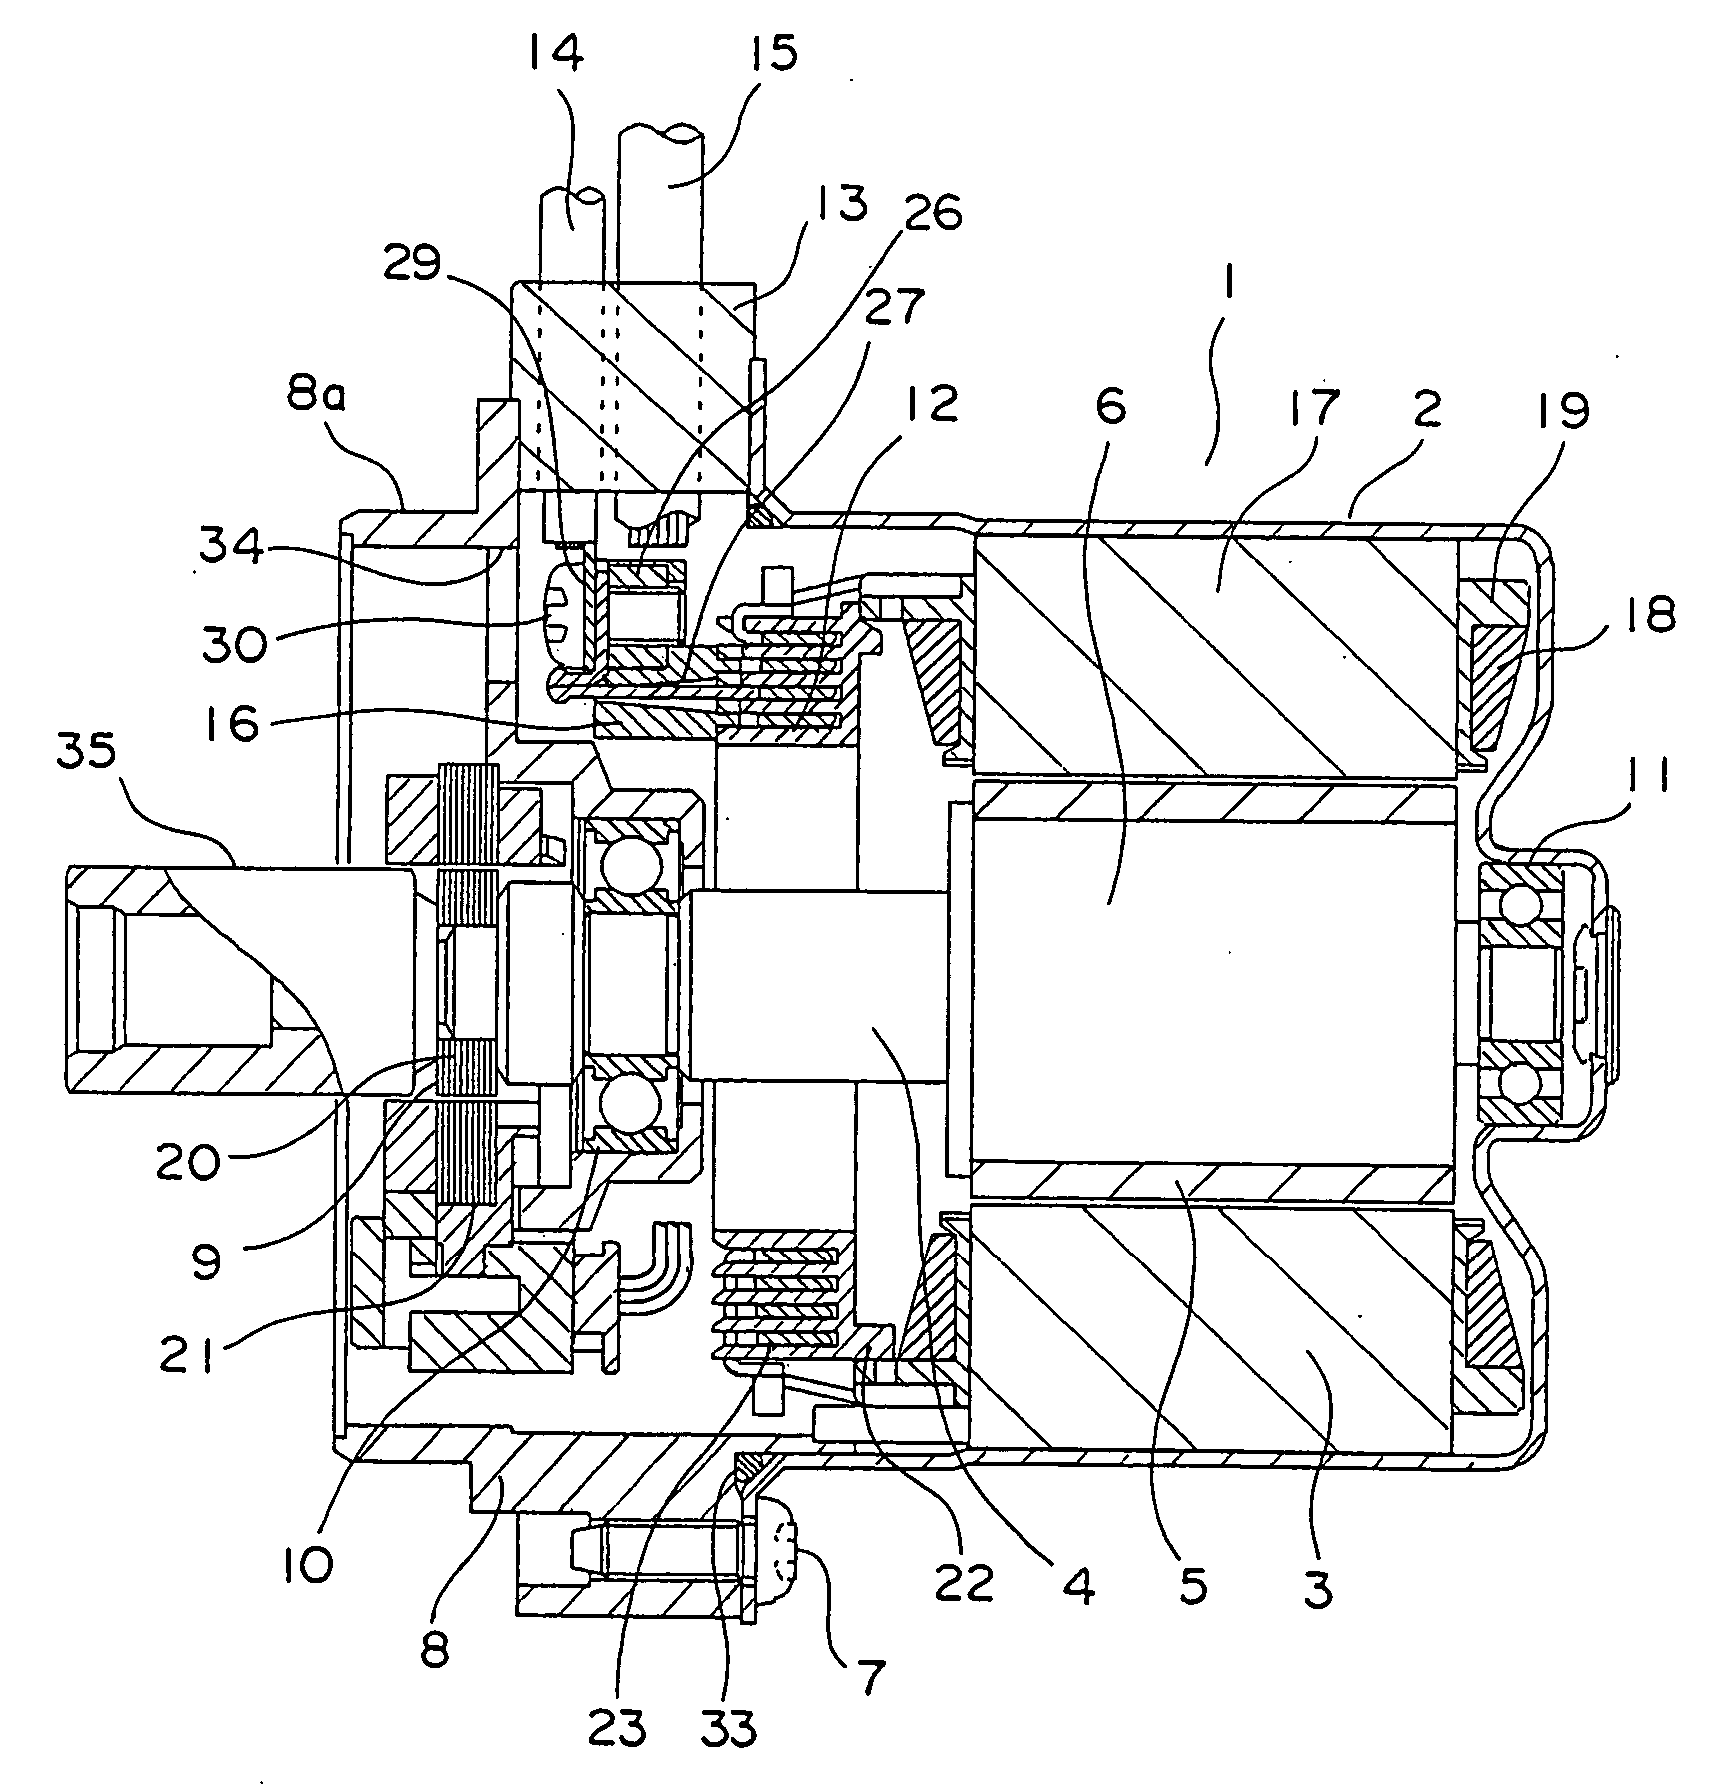 Motor for electric power steering apparatus